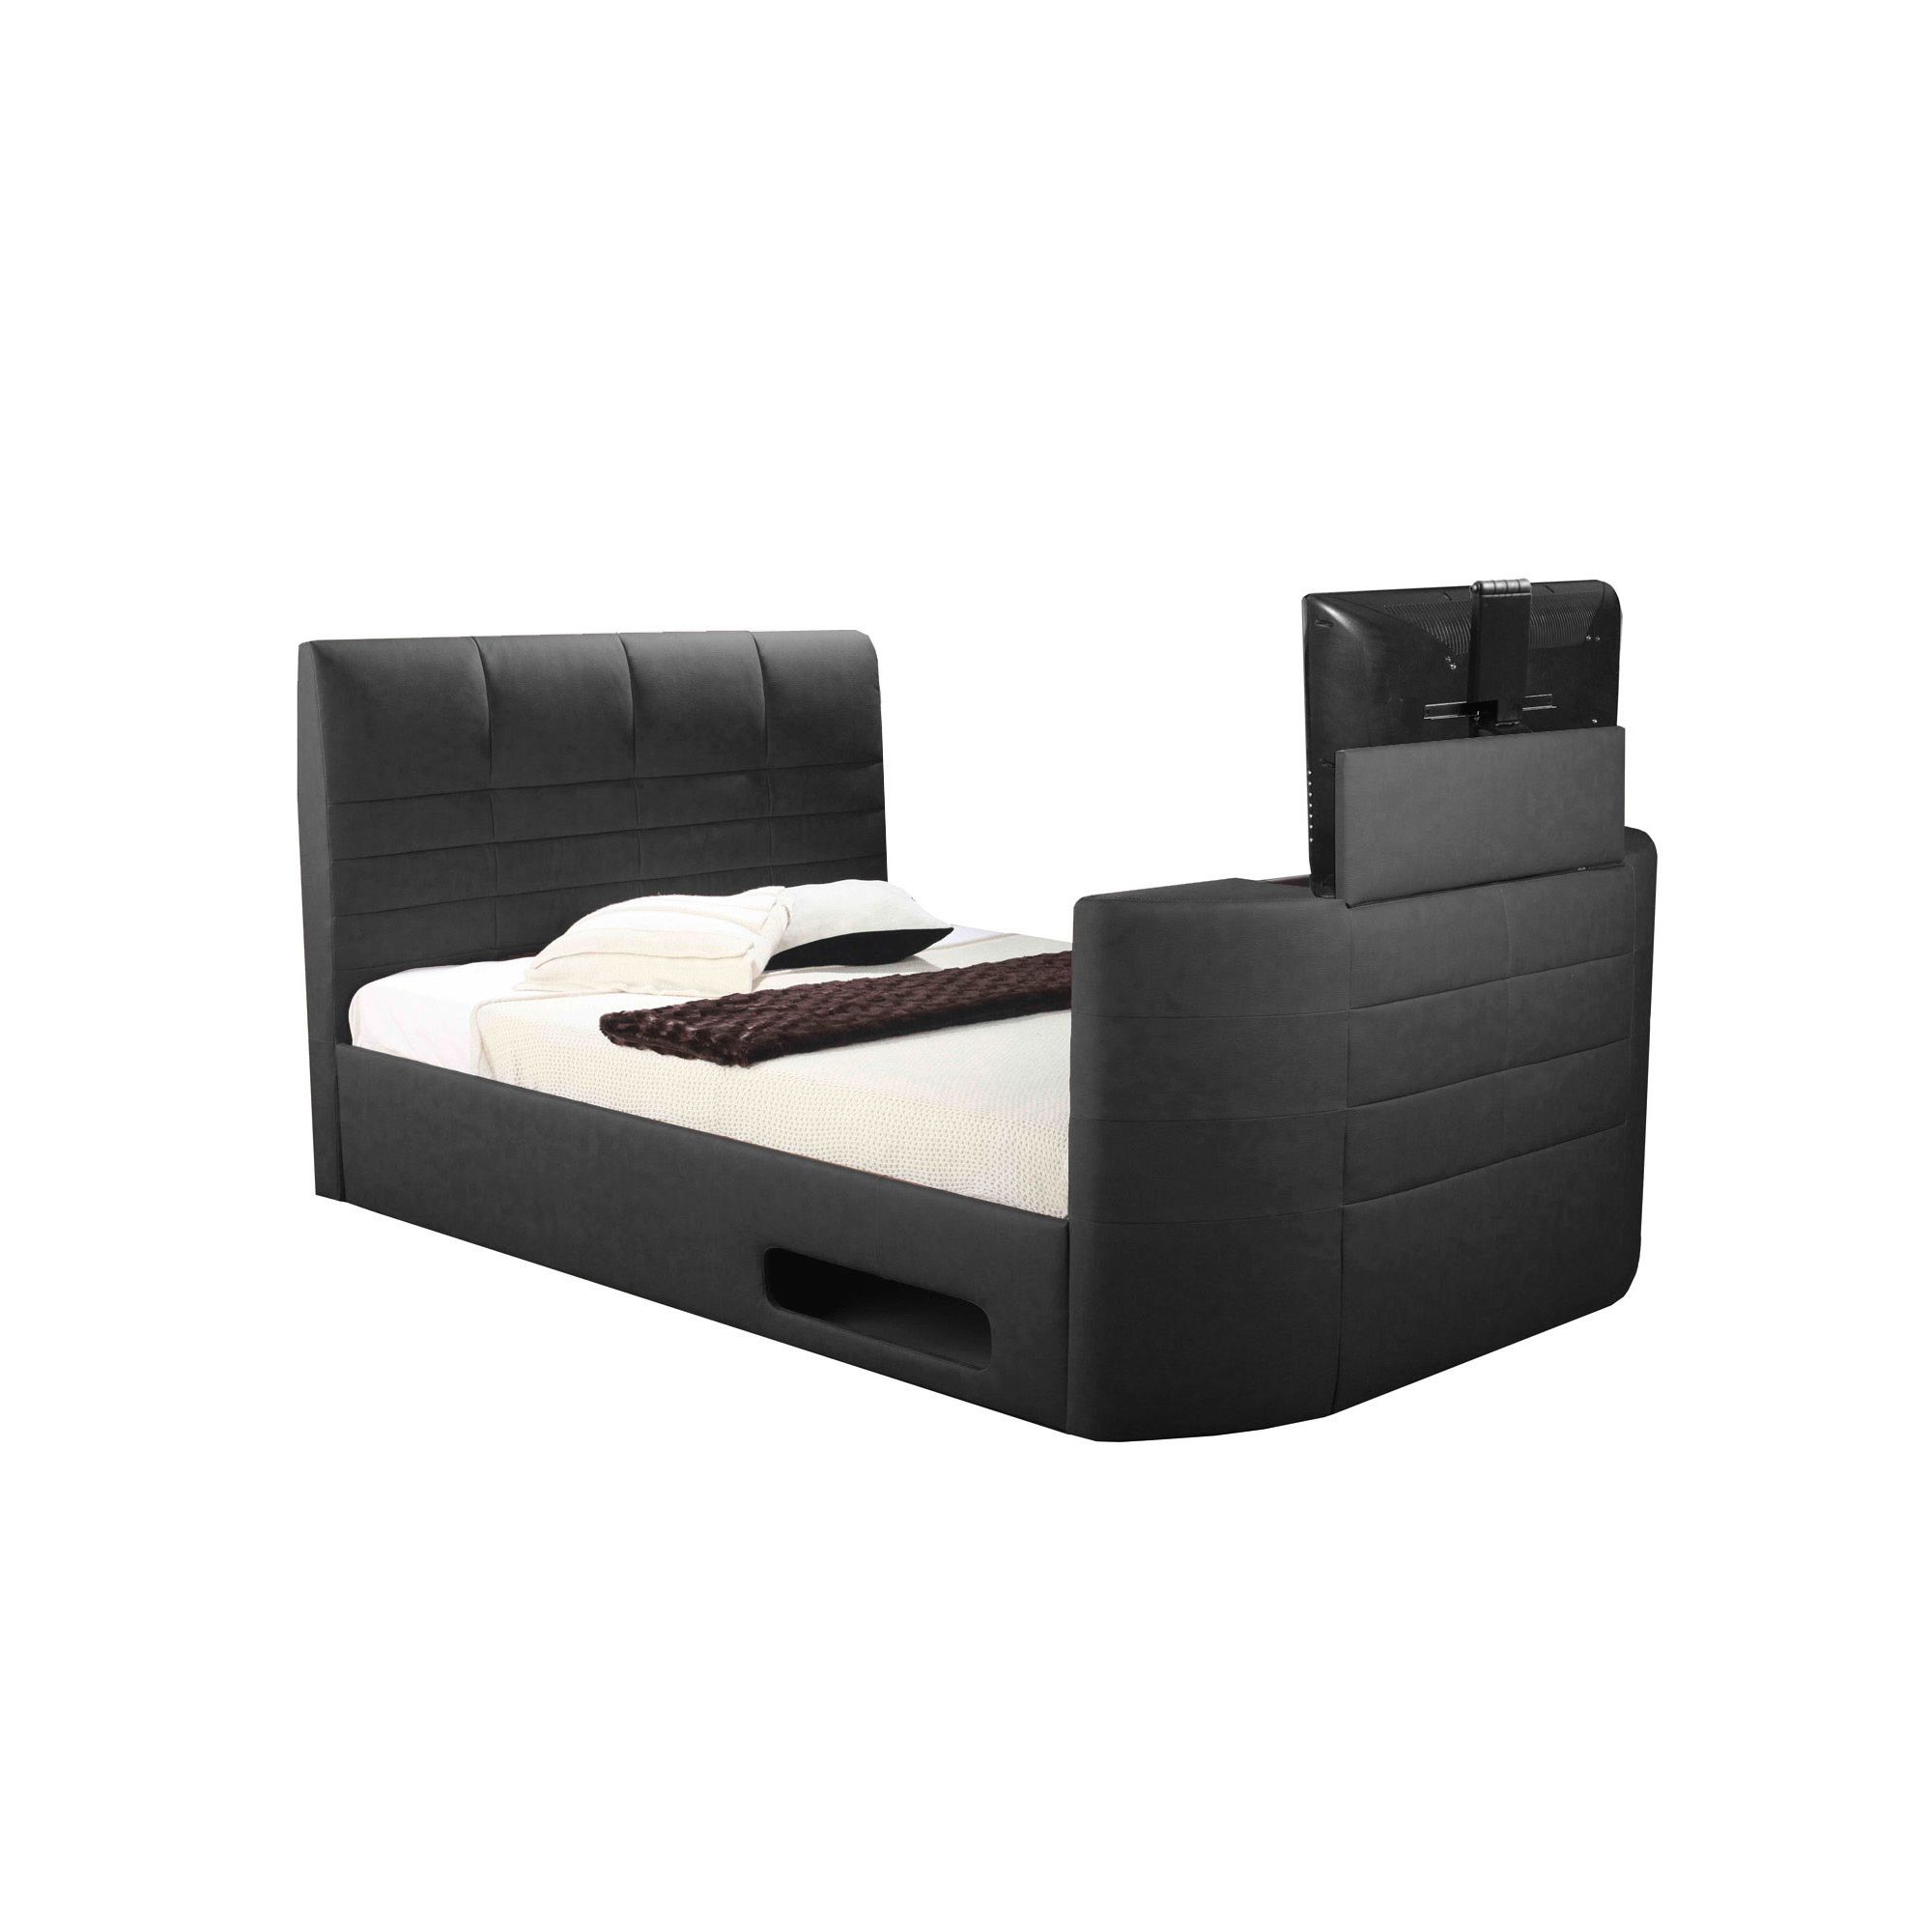 Altruna Miami Electric Wireless TV Bed - Double - Black - With Ottoman at Tescos Direct